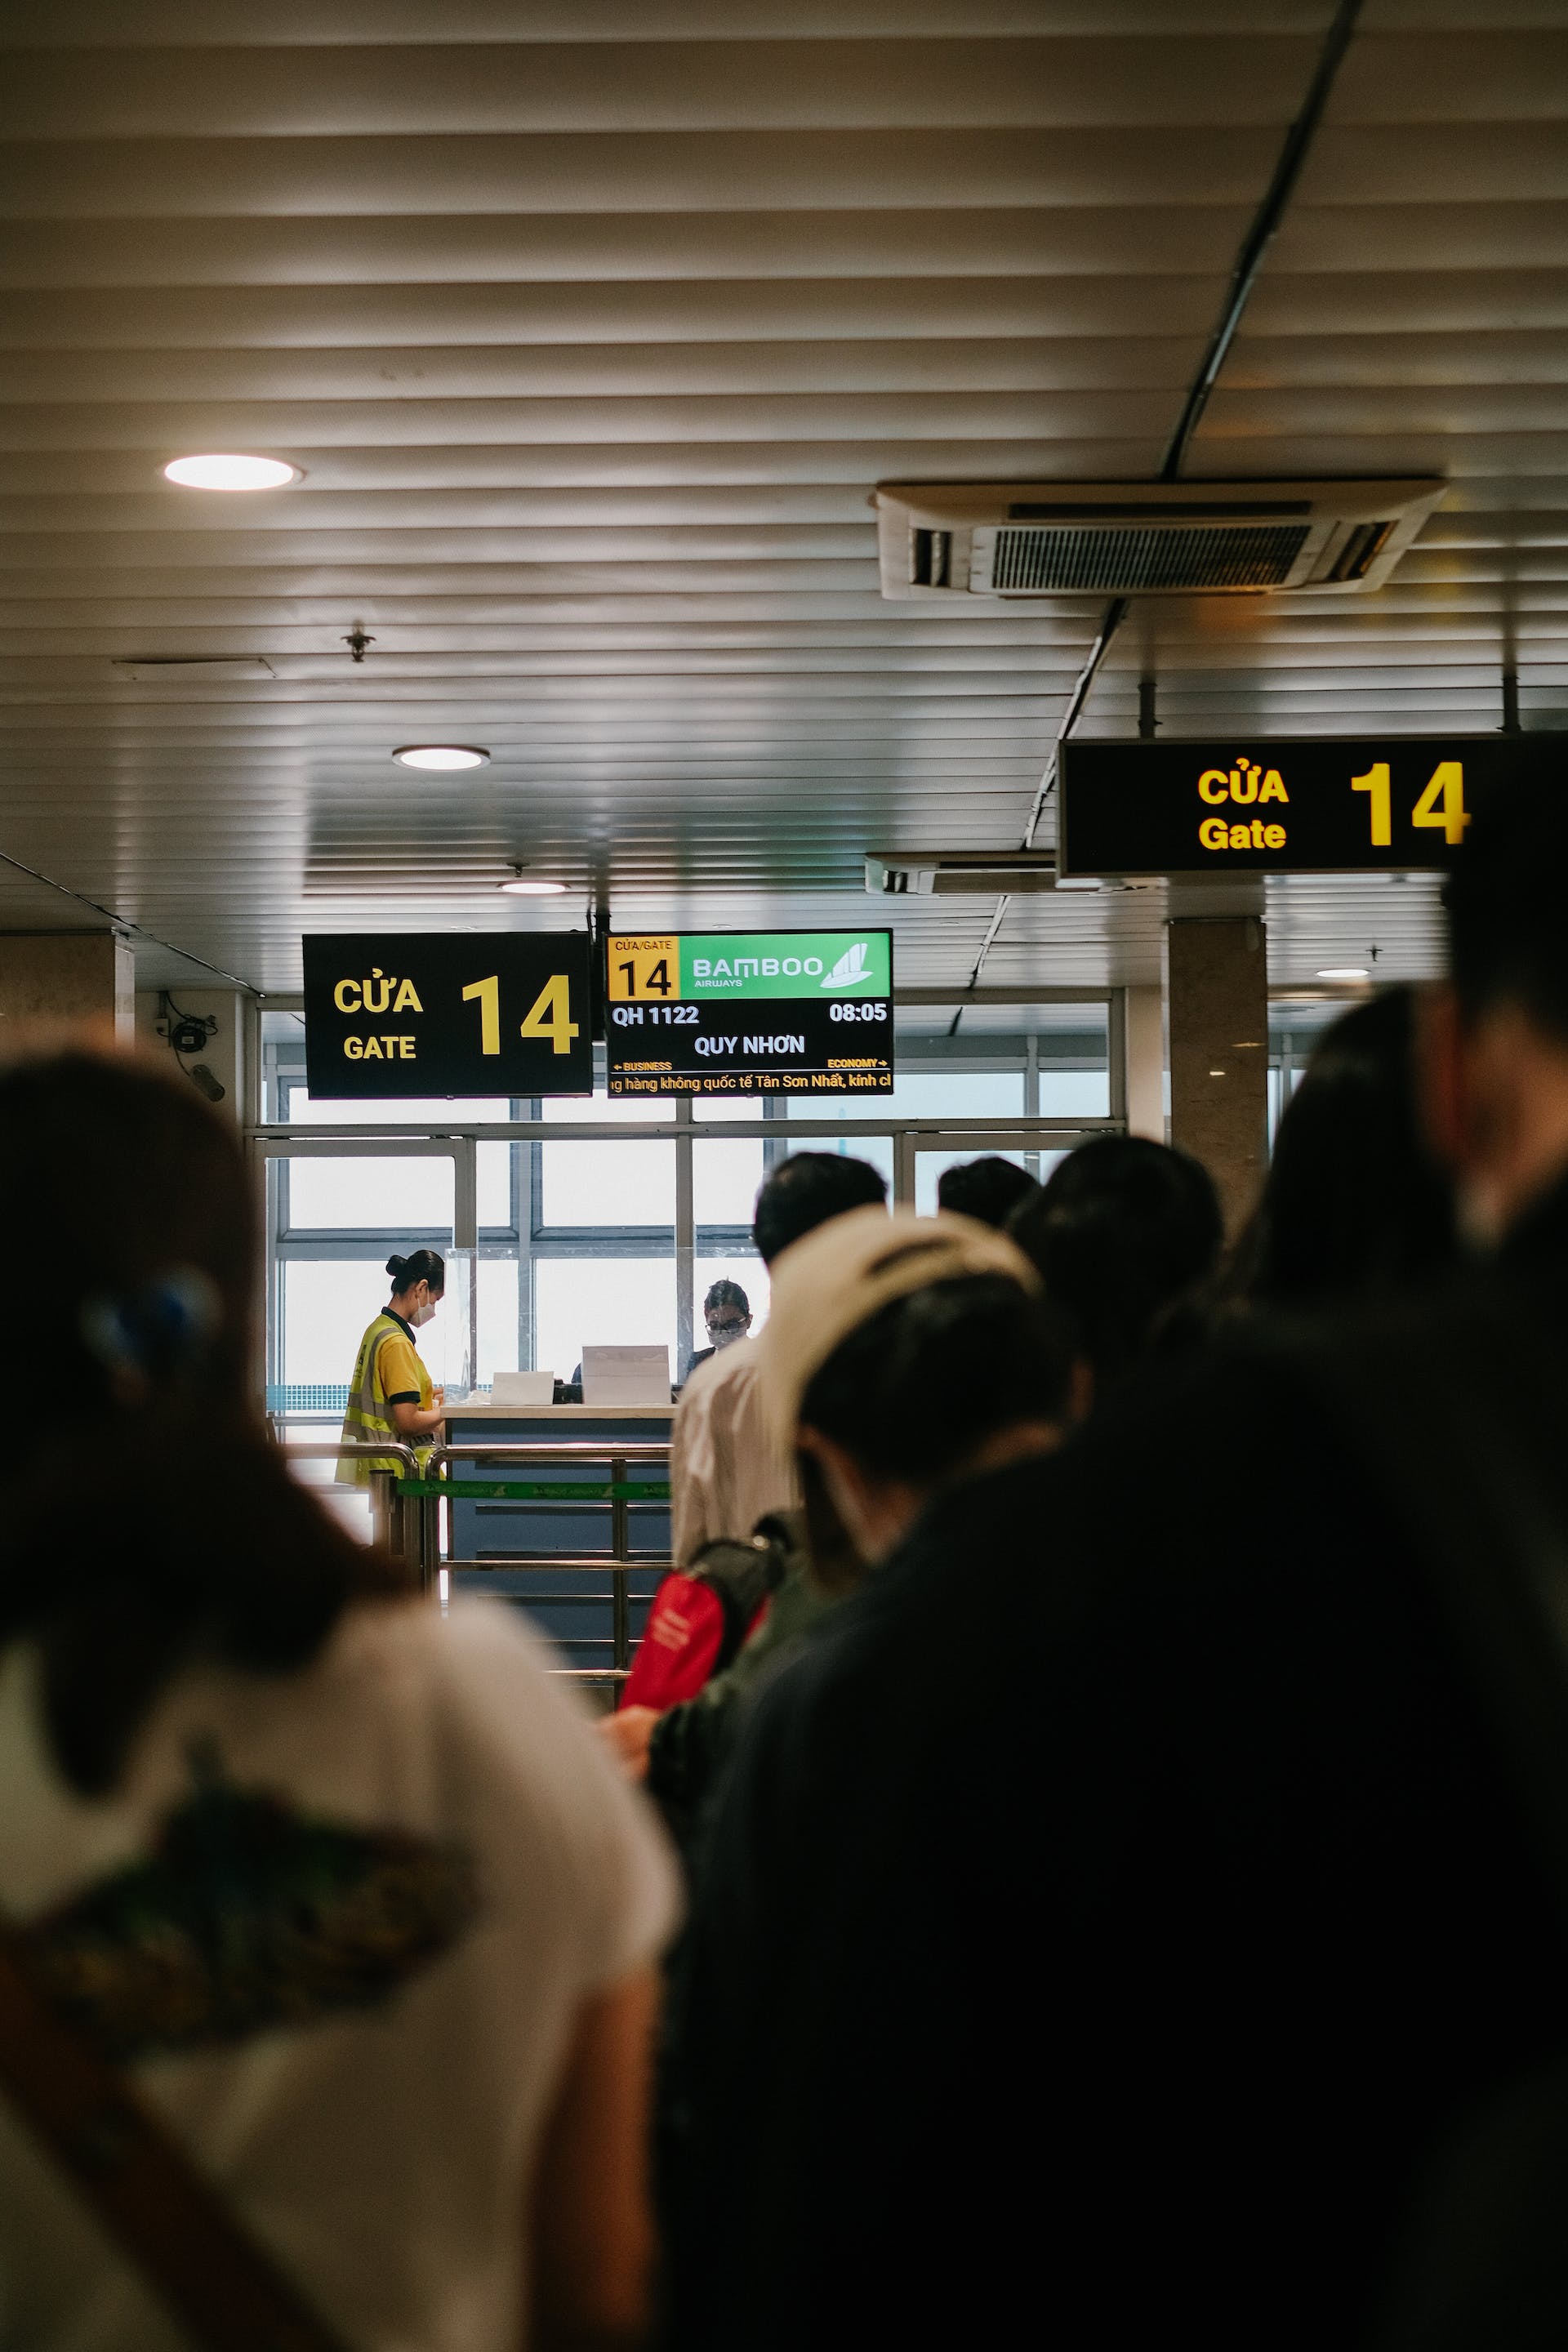 People standing in a queue at an airport | Source: Pexels